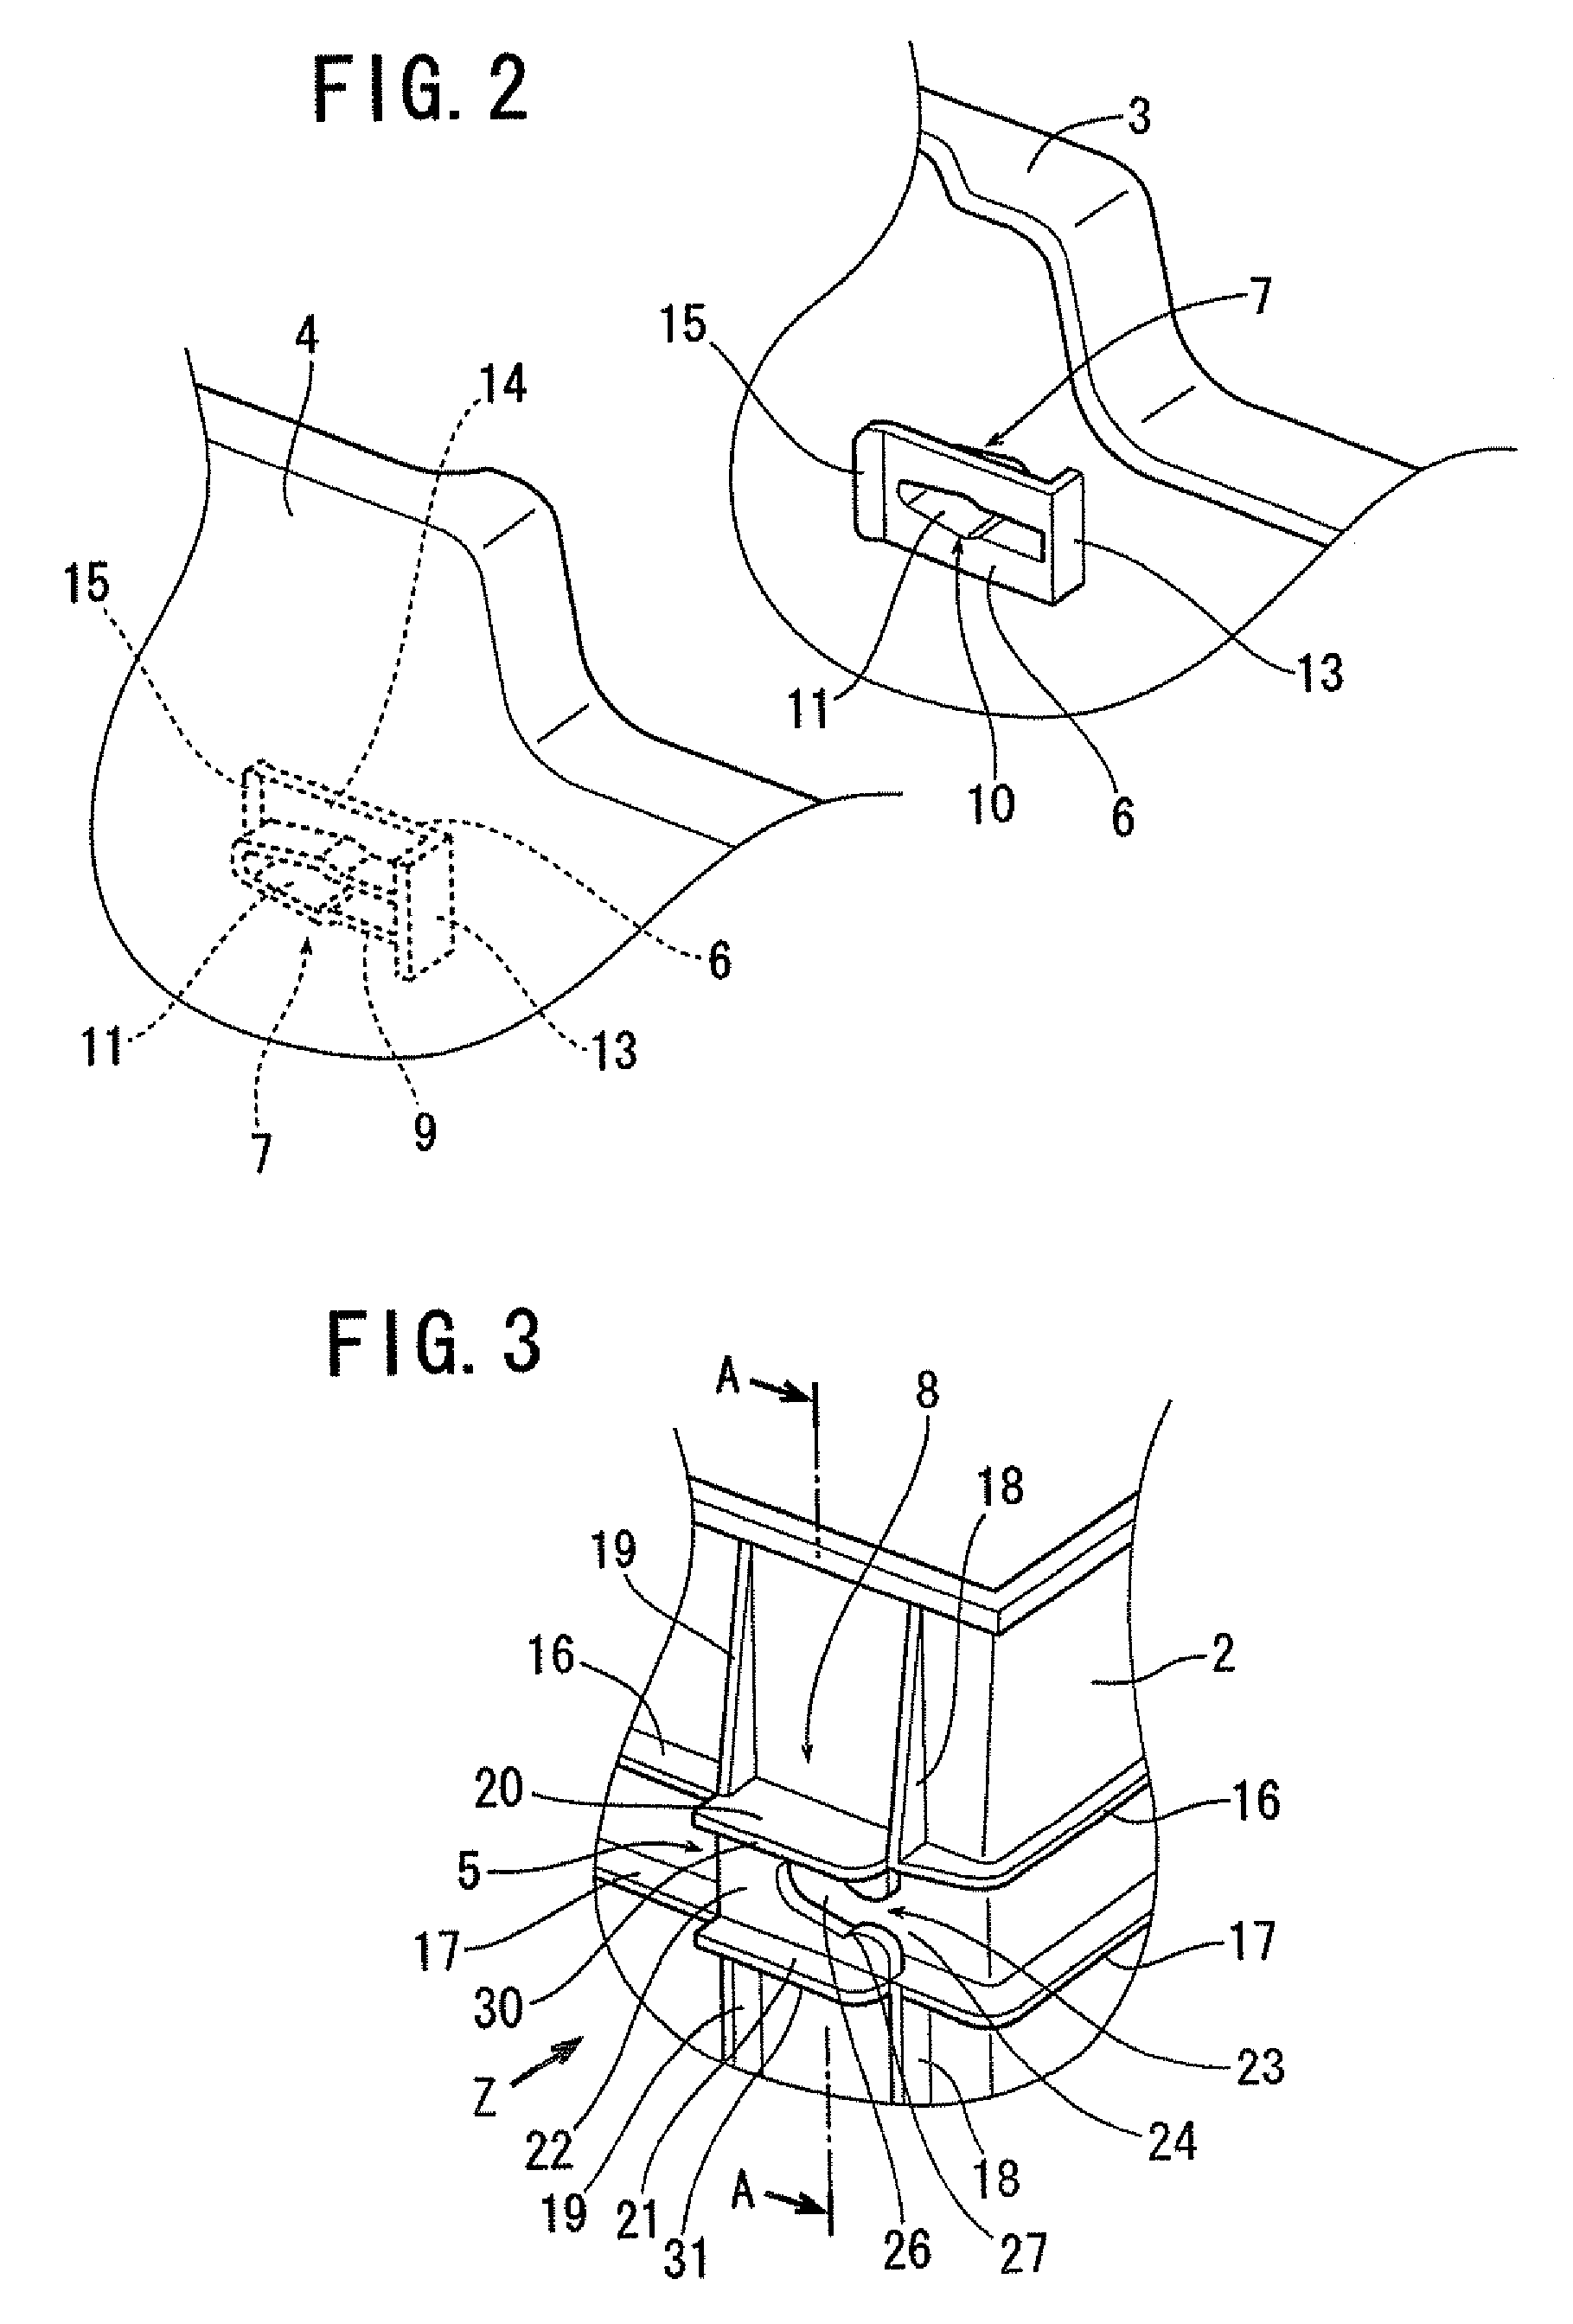 Component parts joining structure